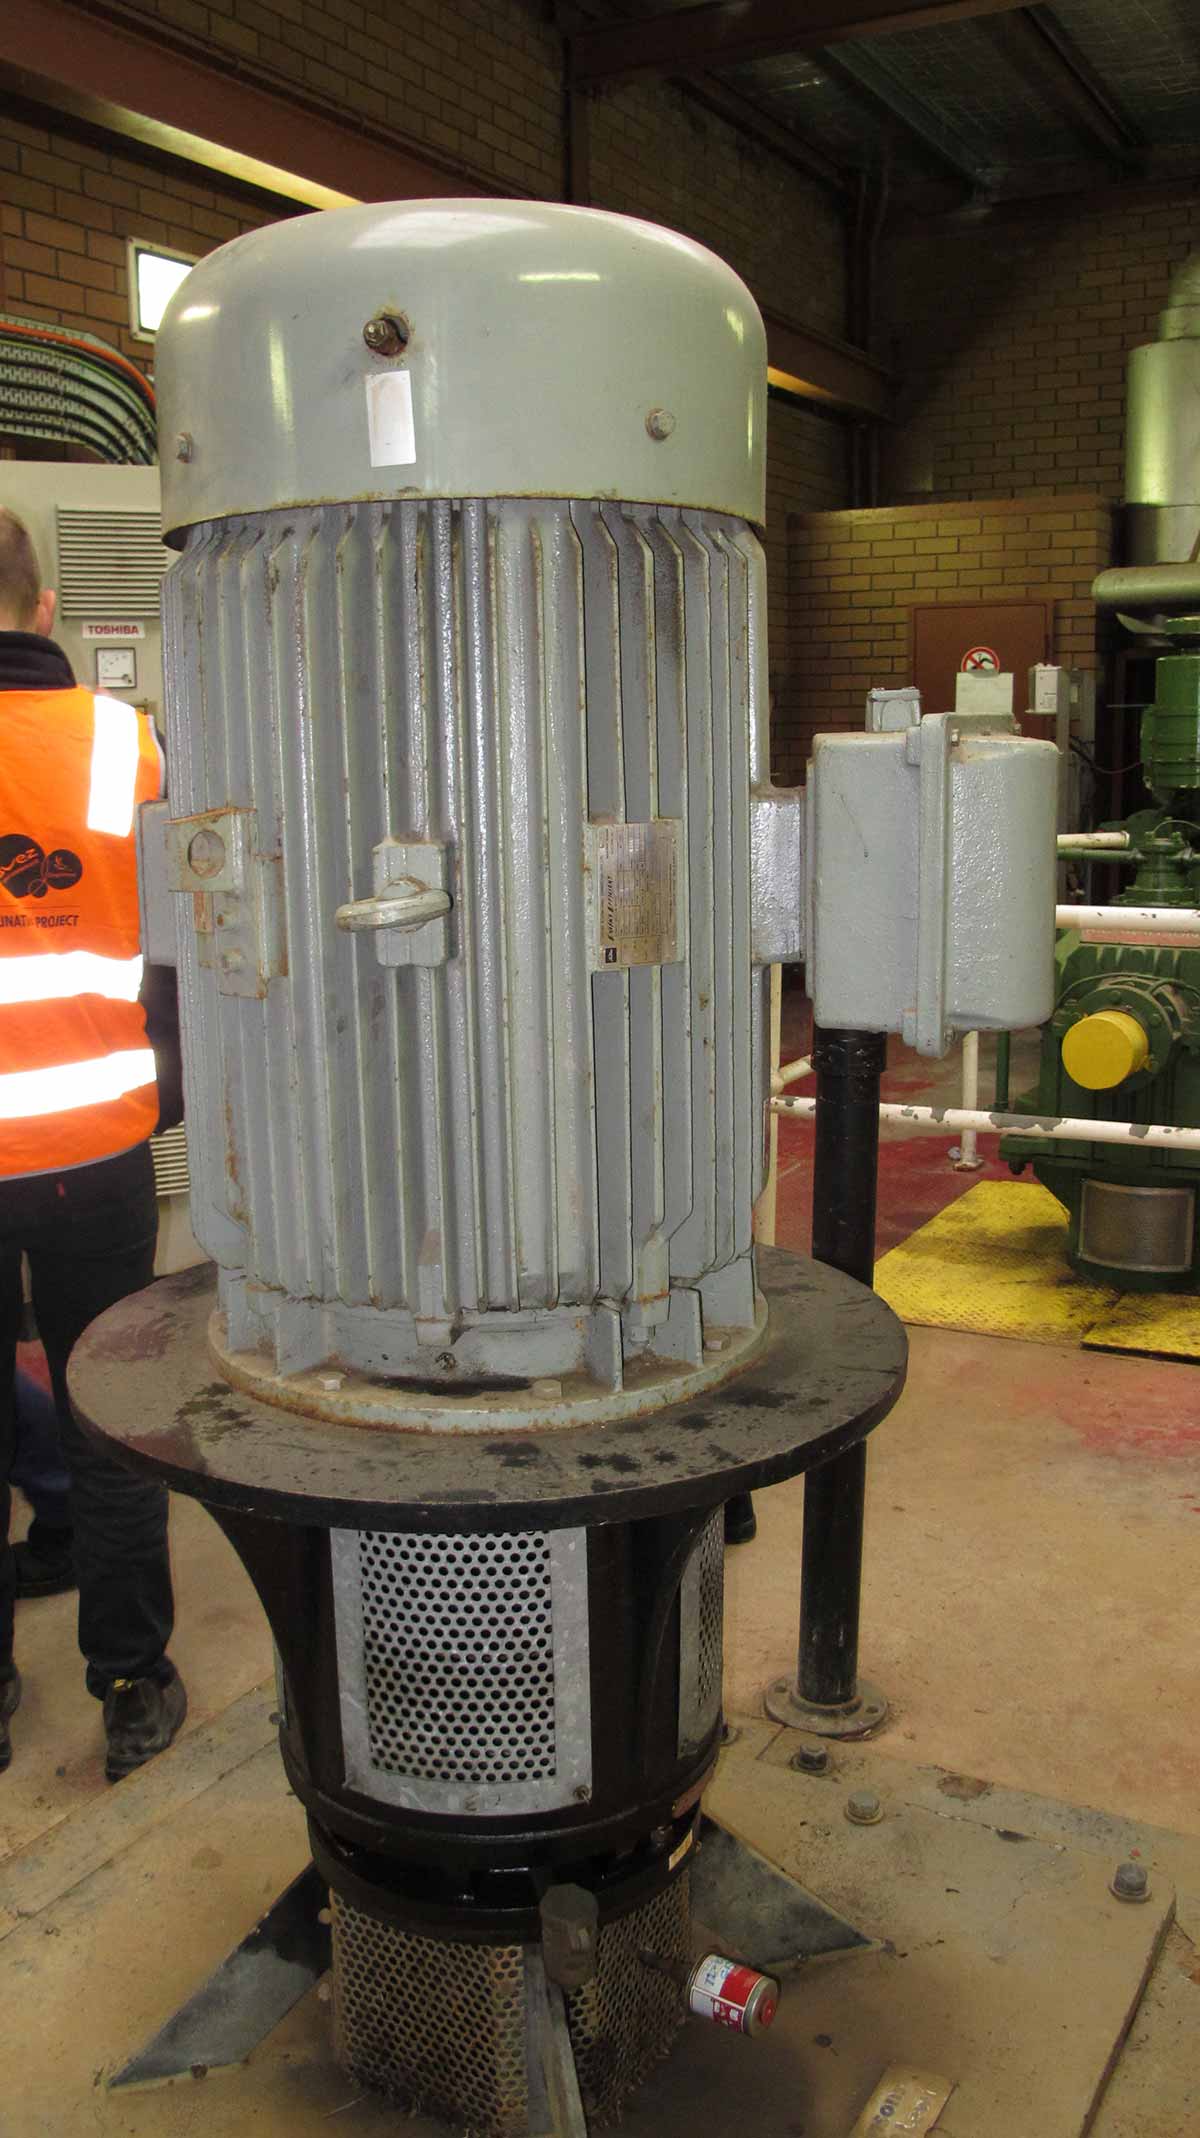 Mordialloc pumping station upgrade